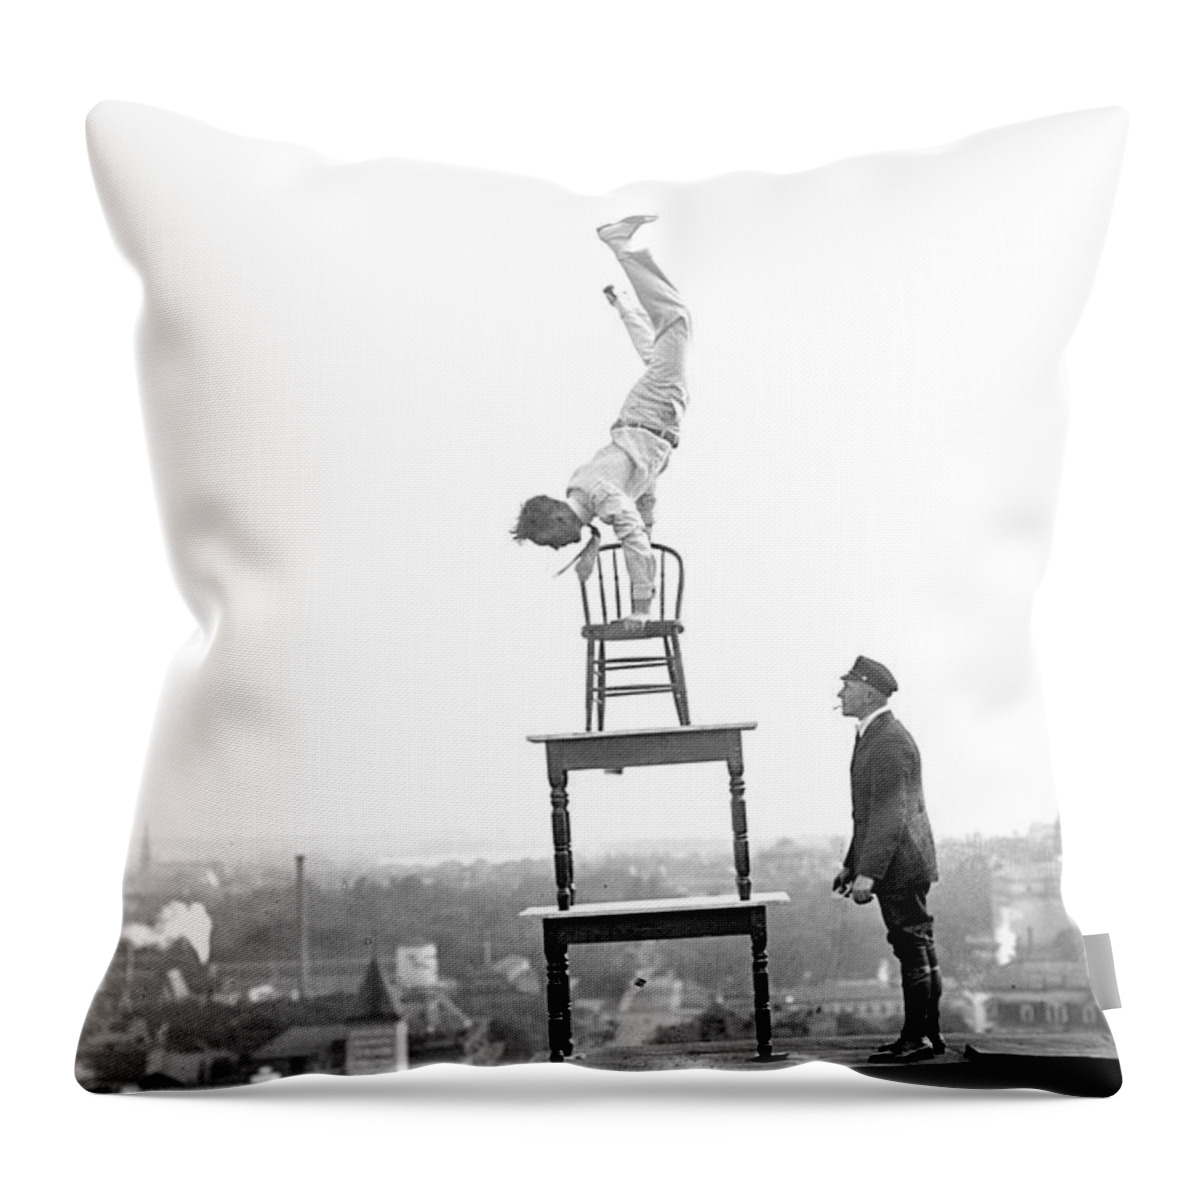 Entertainment Throw Pillow featuring the photograph Jammie Reynolds, American Daredevil by Science Source